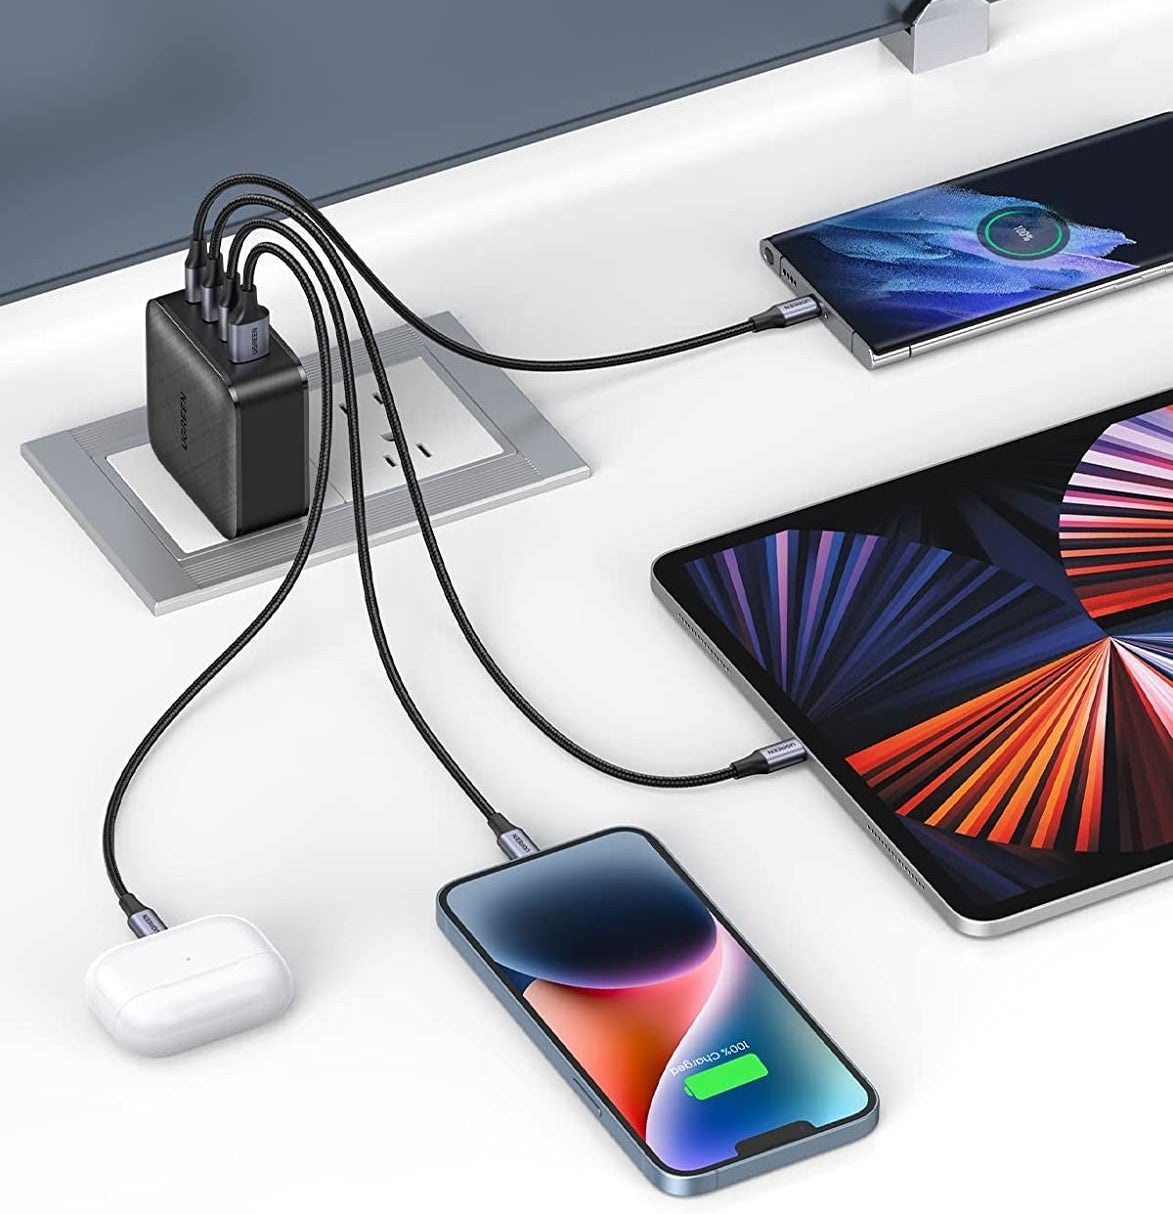 four devices being charged by the charging block